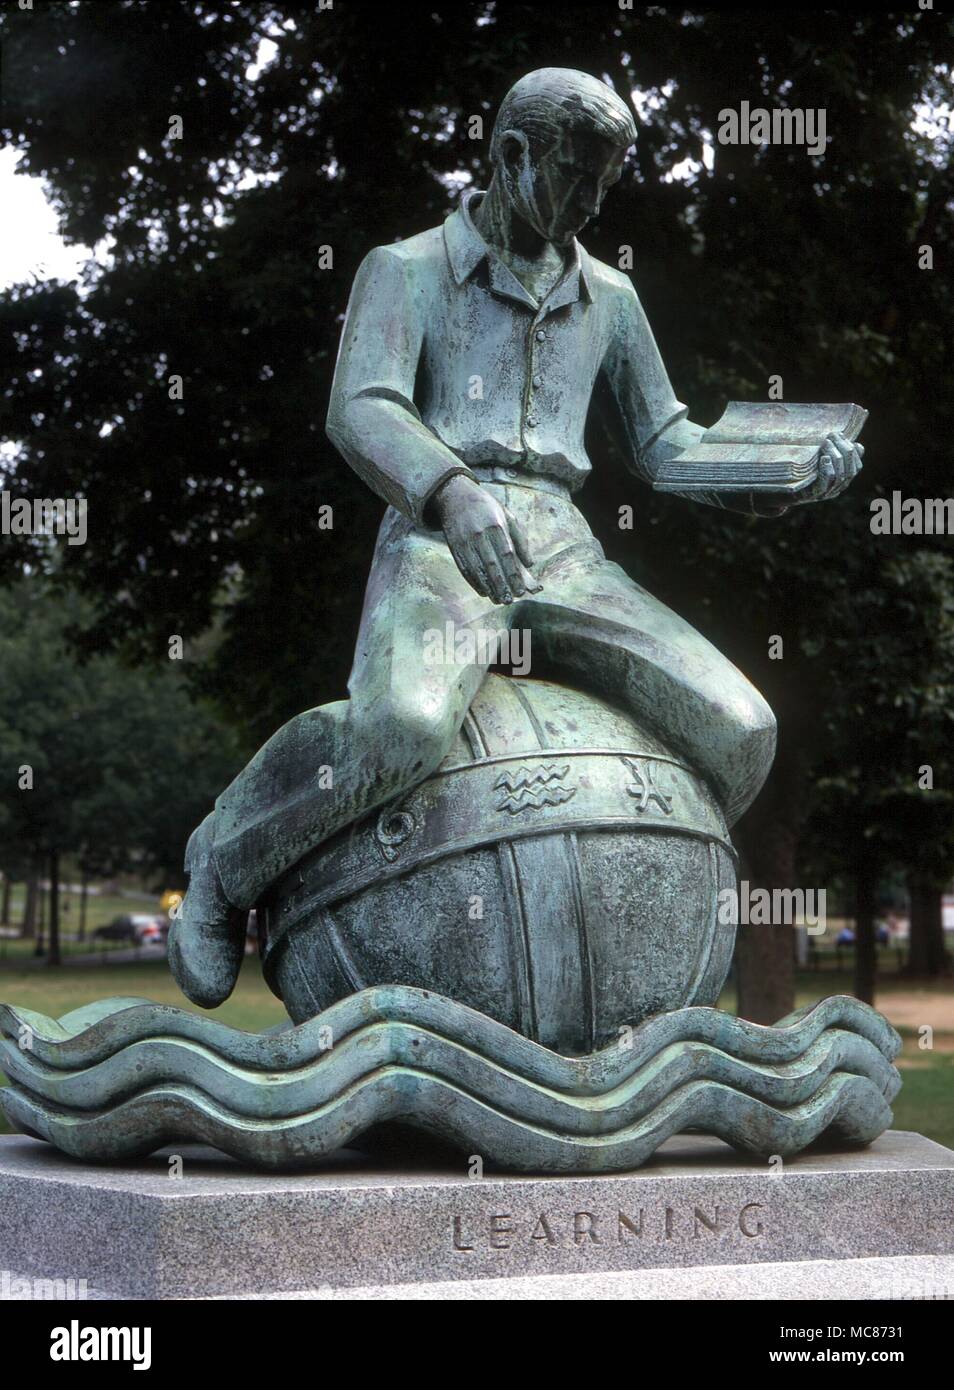 ASTROLOGY - American Boston. Statue on Boston Common intended to represent 'Learning'. A young boy sits reading a book on a celestial globe, marked with the zodiacal sigils. Boston, Massachussetts Stock Photo